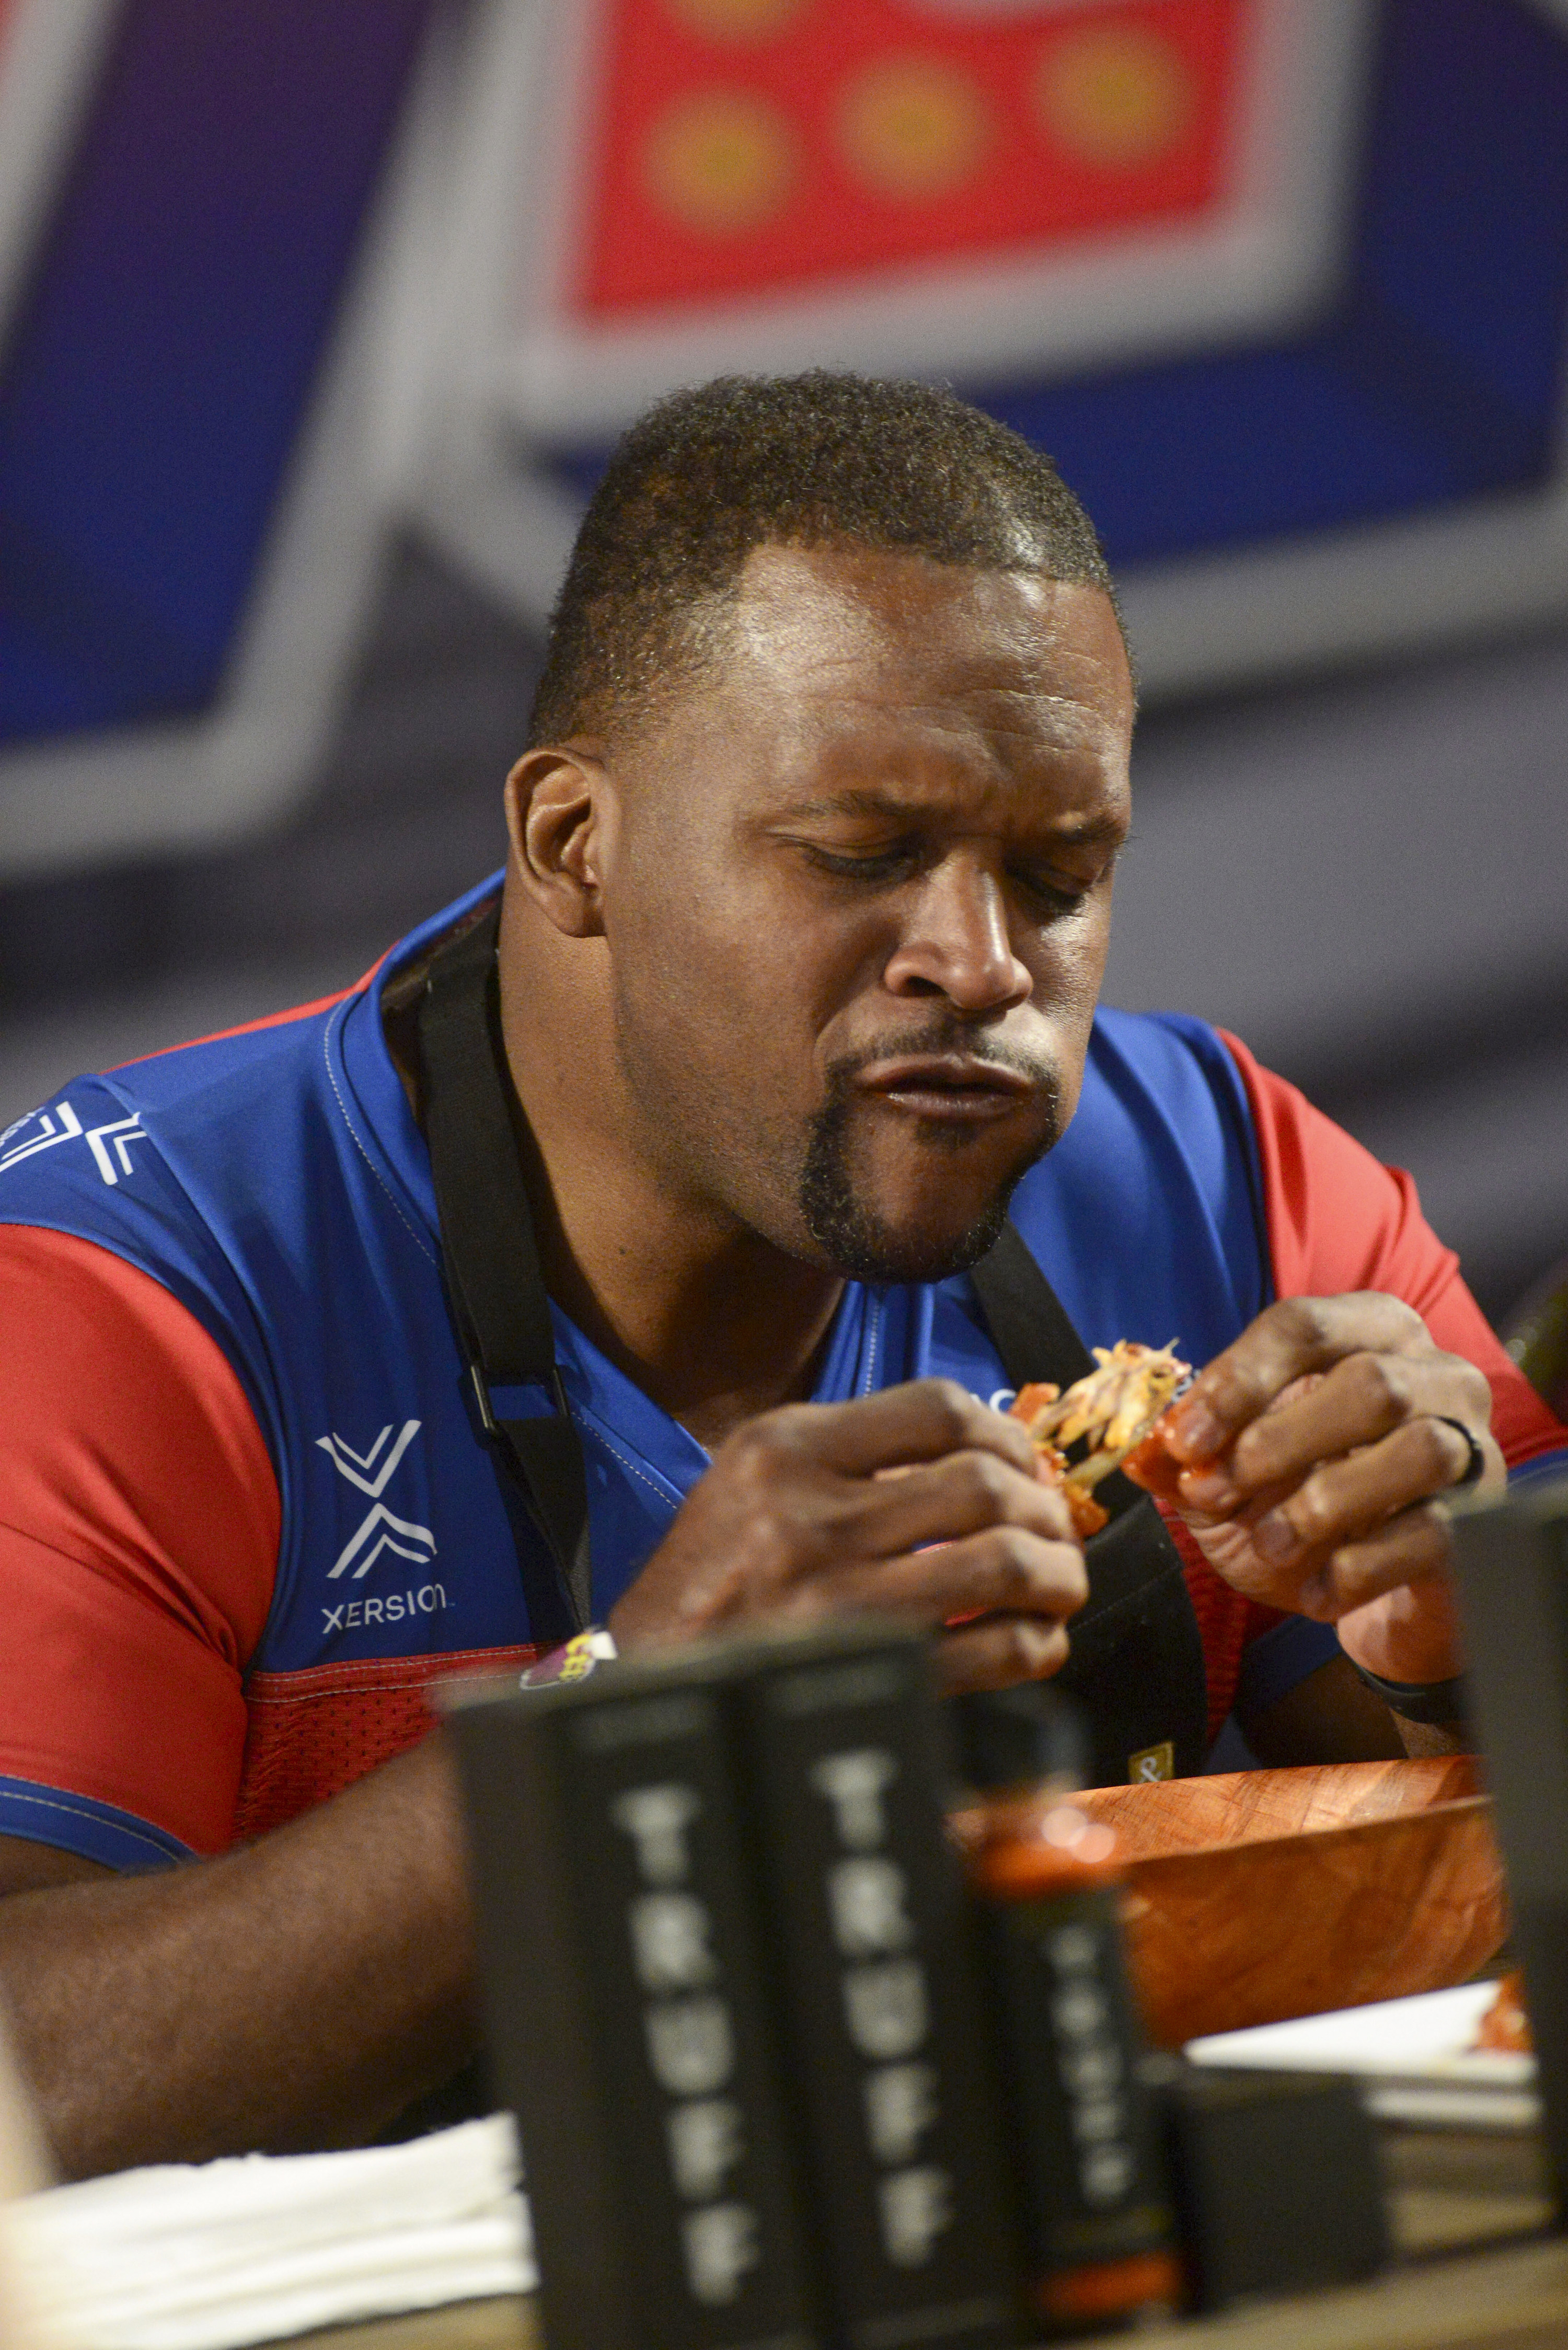 Spice Adams participates in a celebrity challenge at The SHAQ Bowl